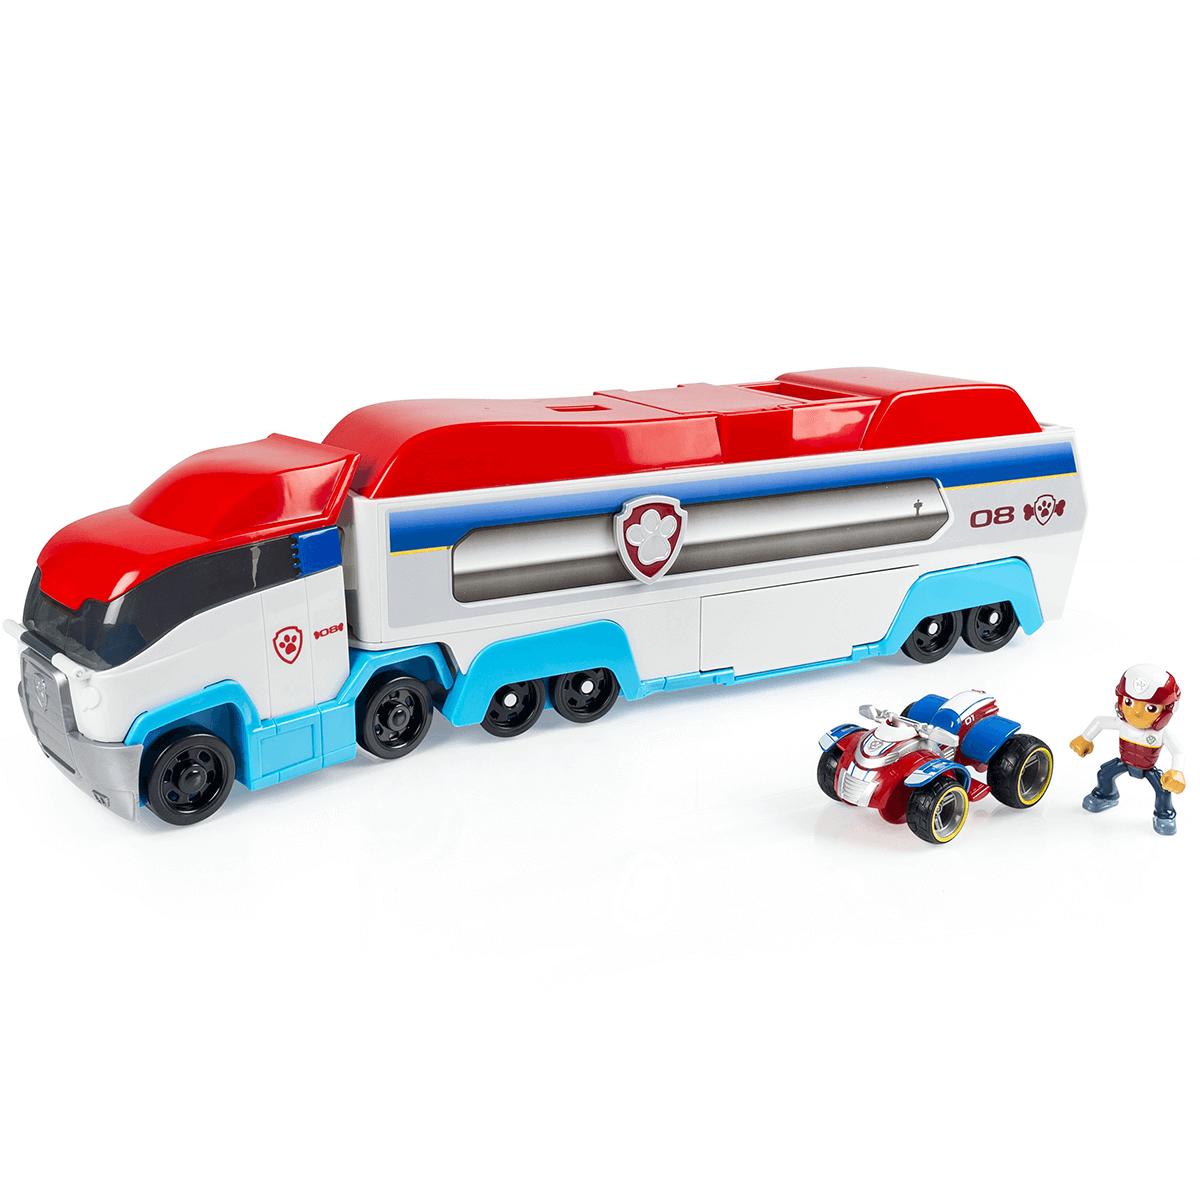  Paw Patroller Deluxe Lorry